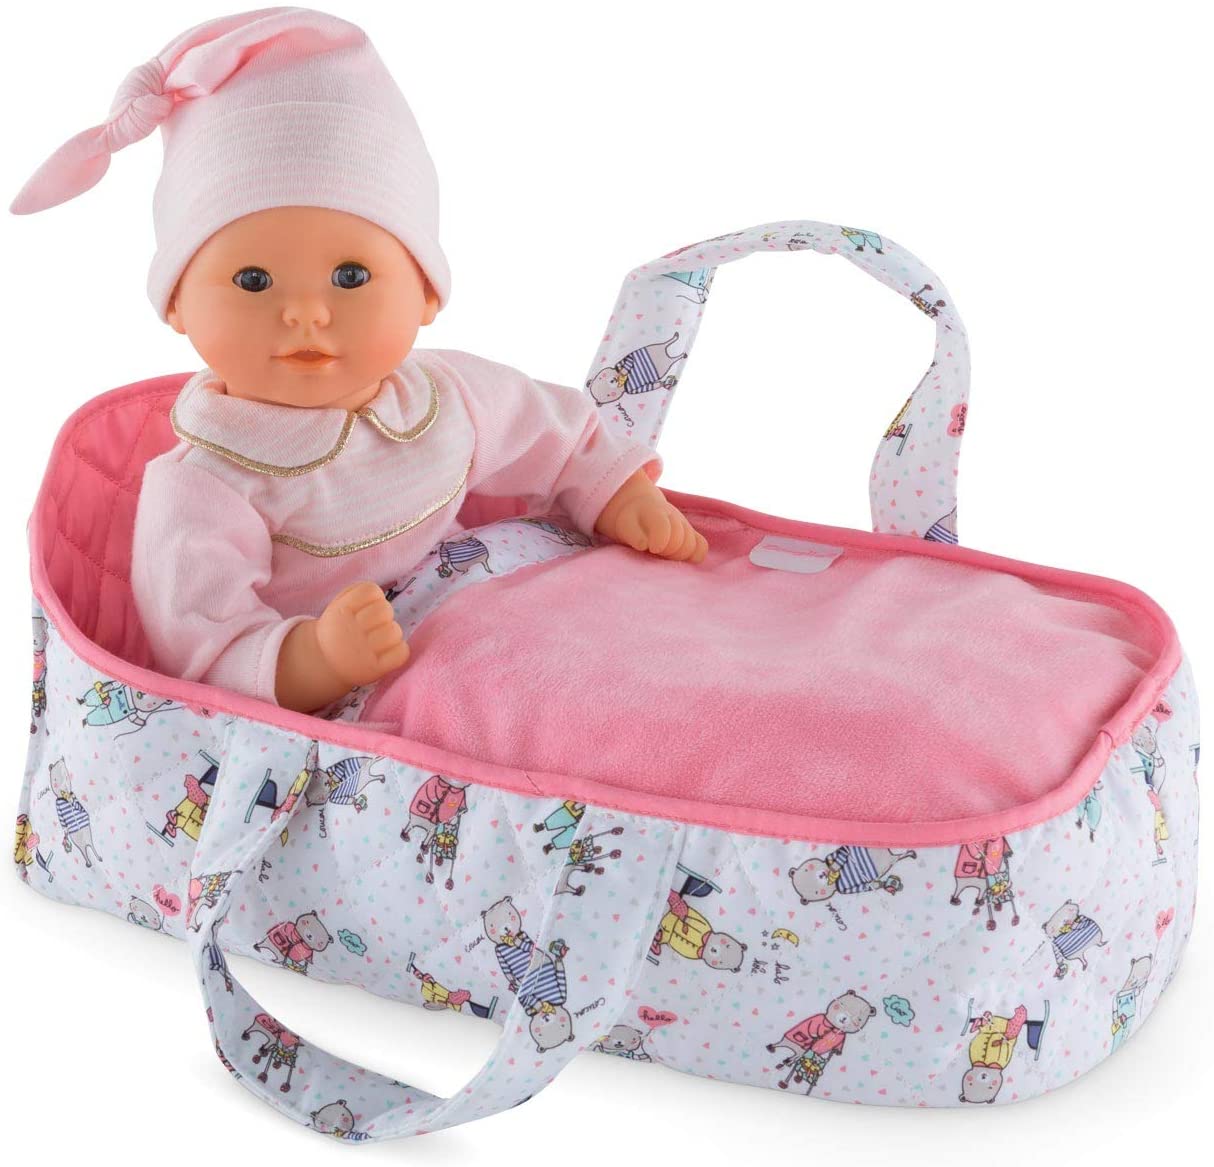 (OPEN BOX) Copy of Corolle Mon Premier Poupon Carry Bed Toy Baby Doll Pink, 12 inches